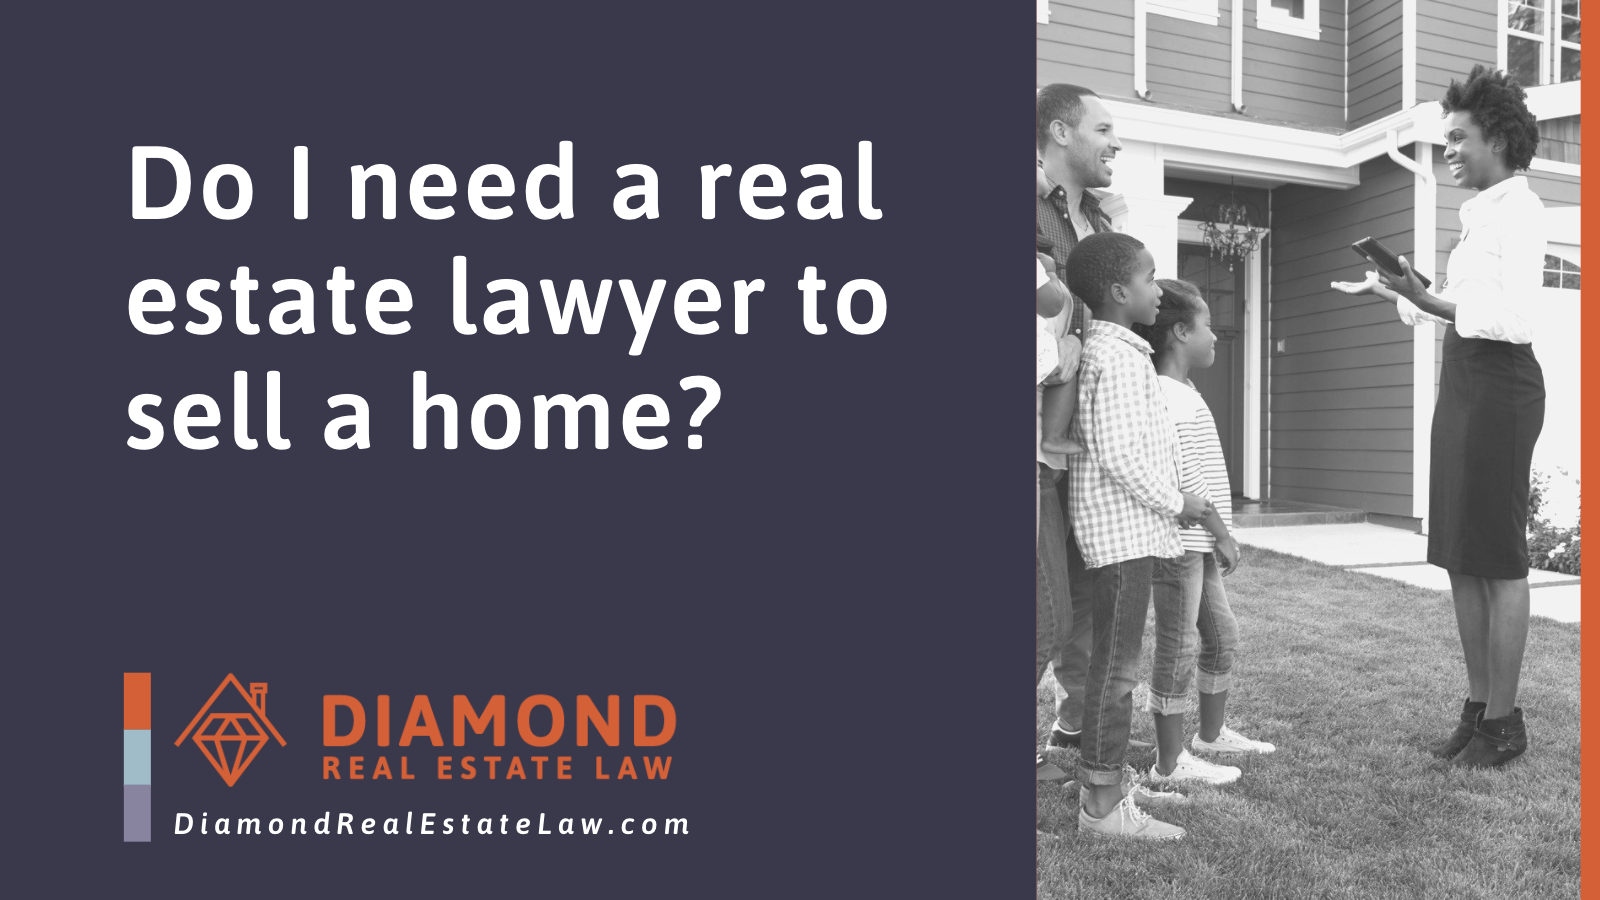 Do I need a real estate lawyer to sell a home - Diamond Real Estate Law | McHenry, IL Residential Real Estate Lawyer